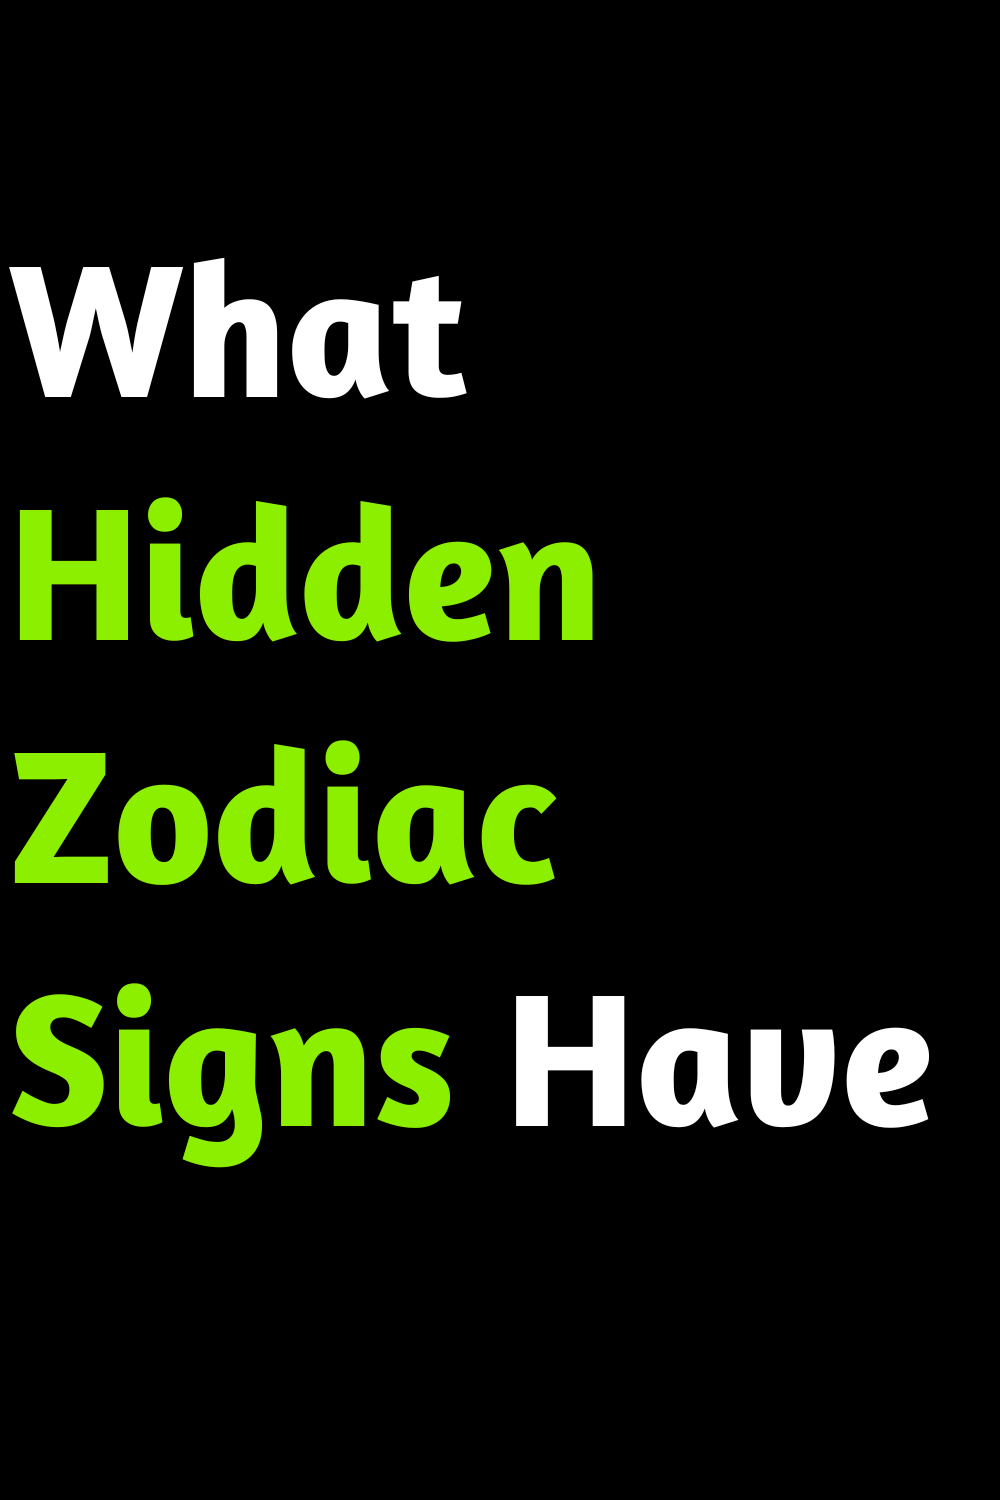 What Hidden Zodiac Signs Have